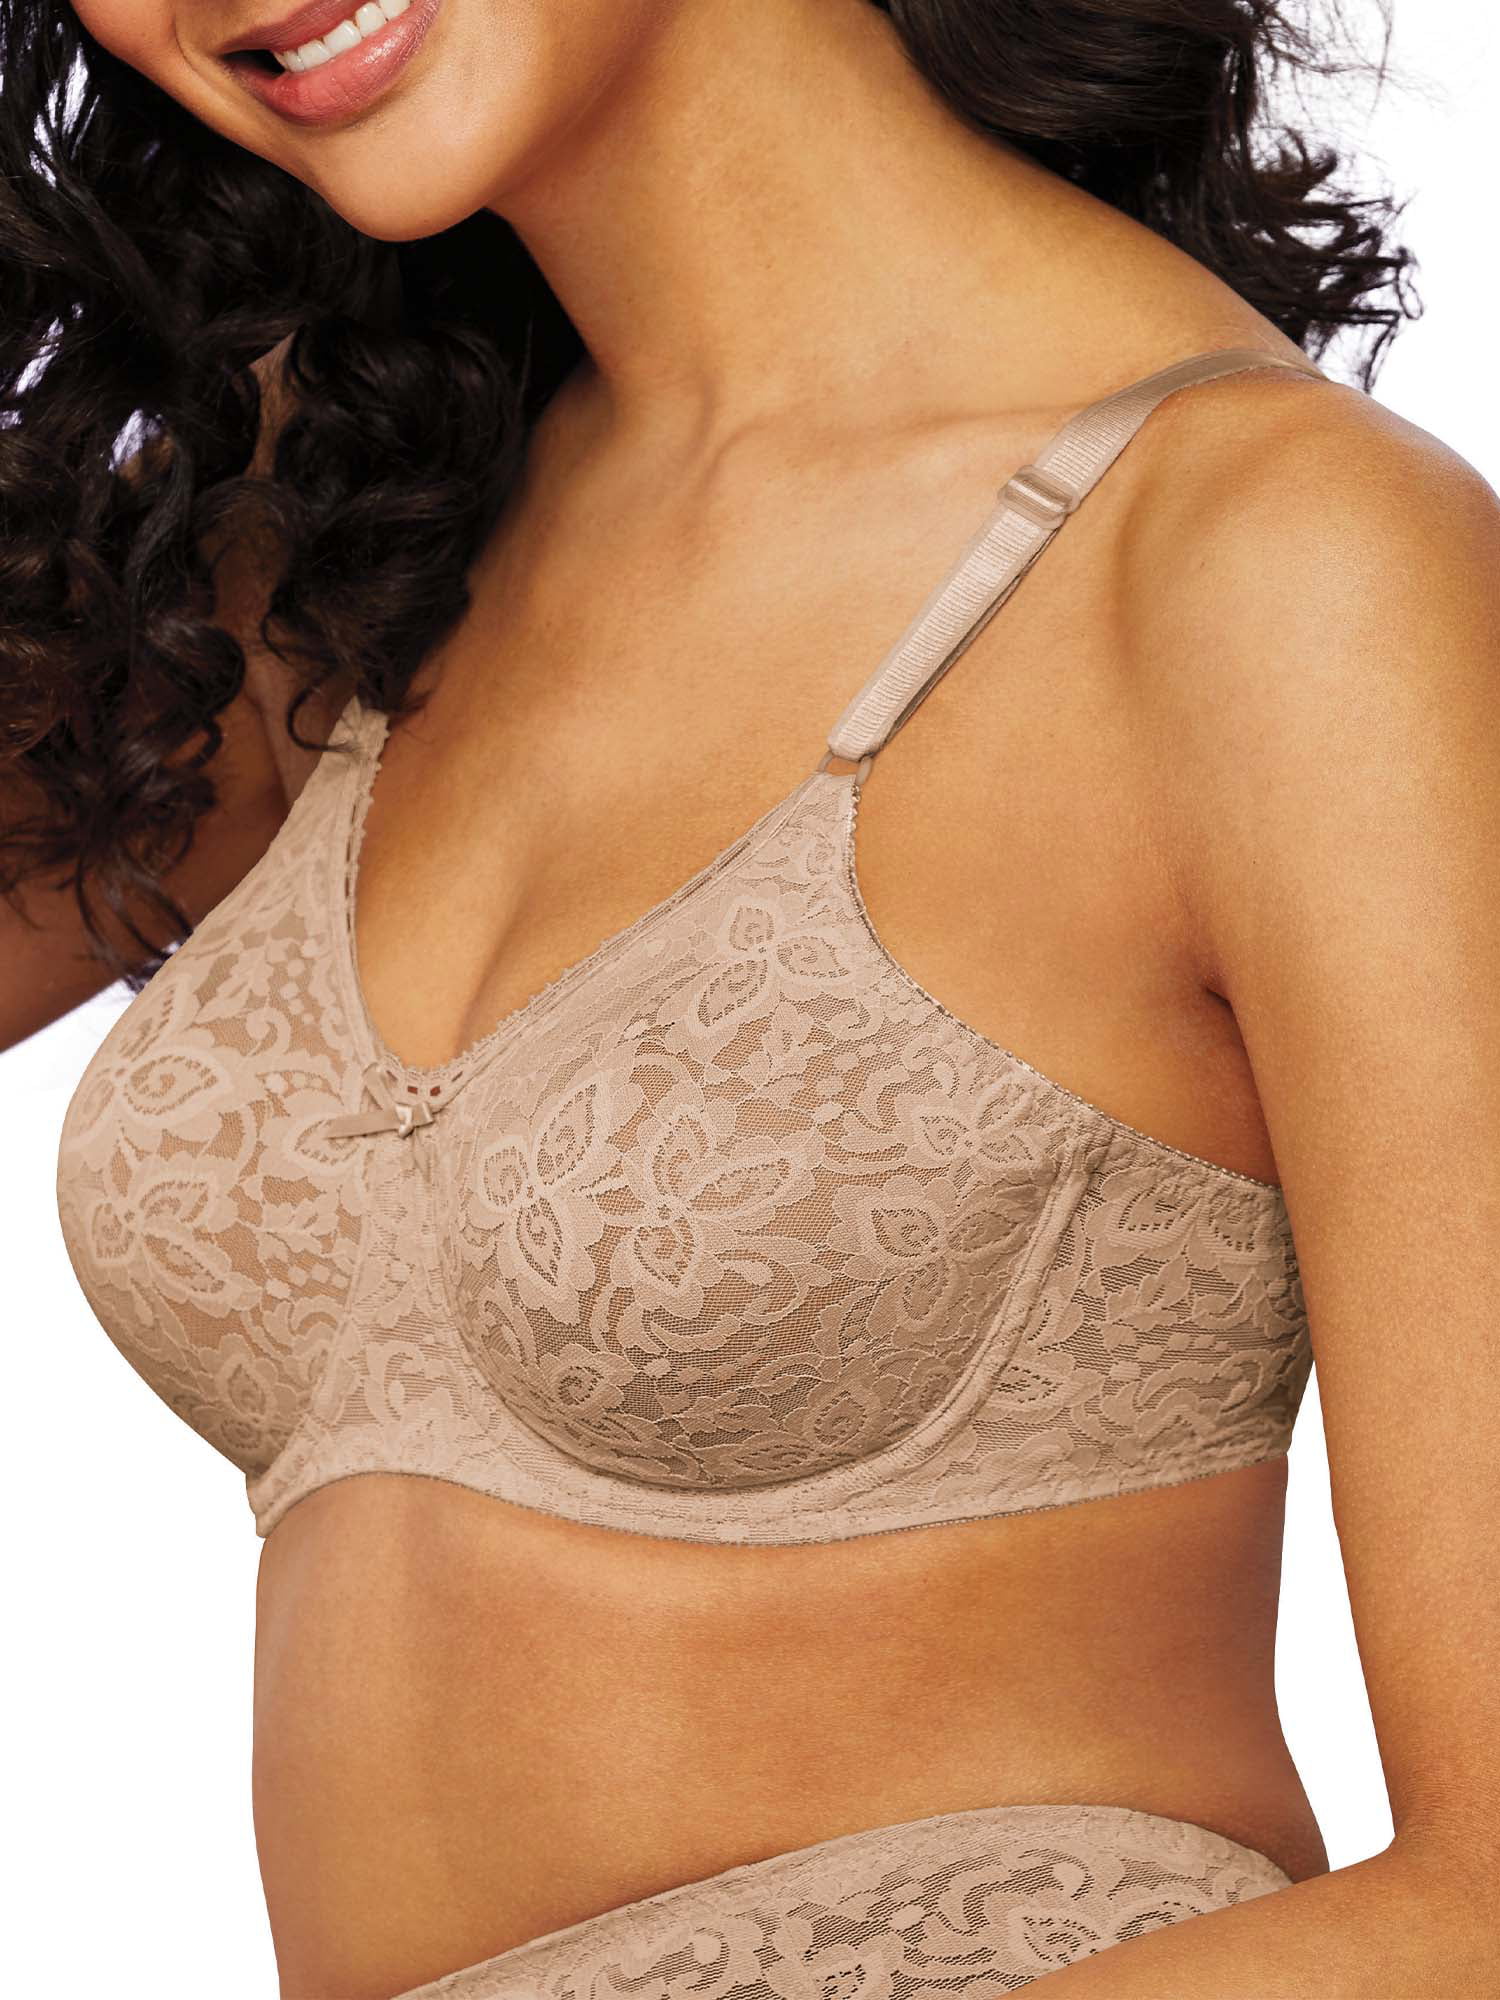 Buy Womens Lace and Smooth Underwire Bra #3432 at Ubuy Zambia